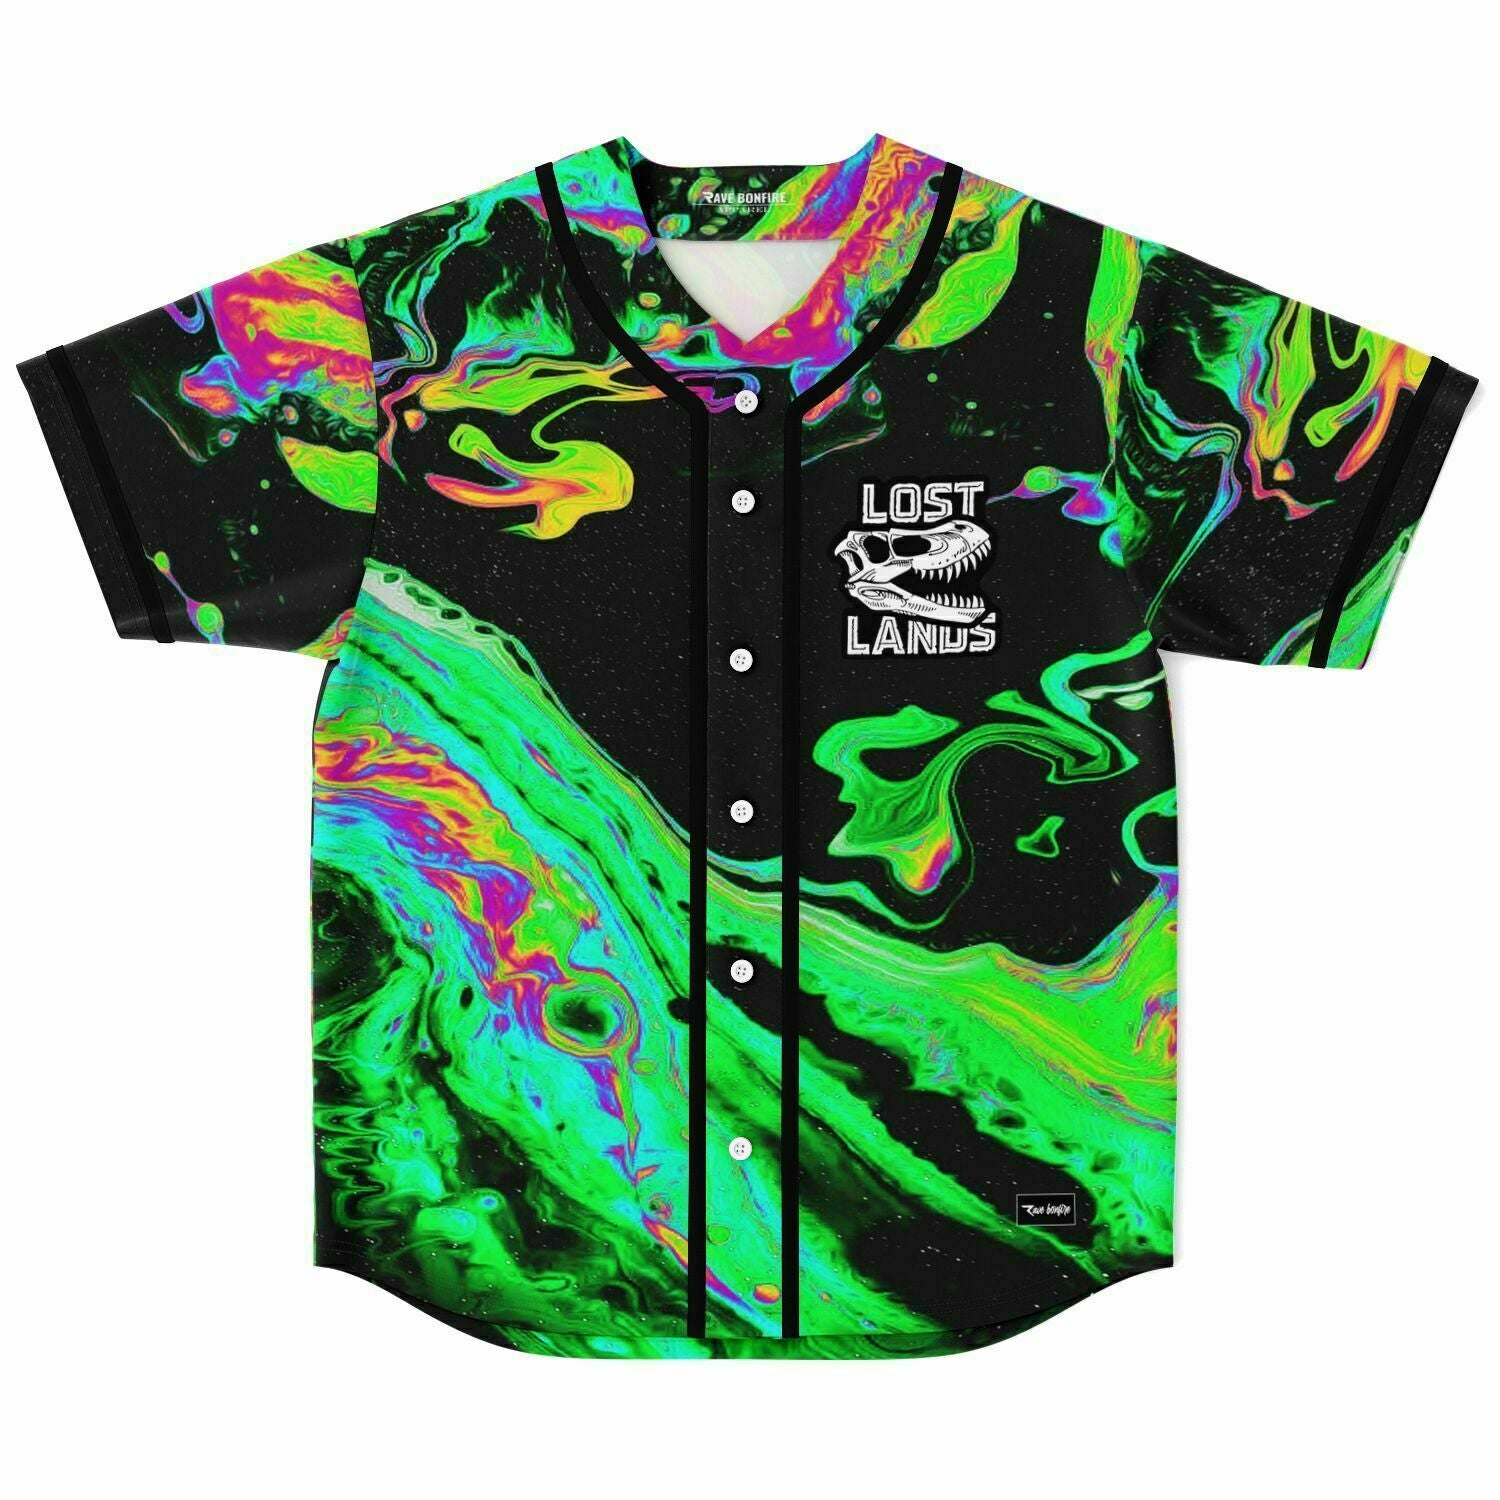 Lost Lands 2023 jersey